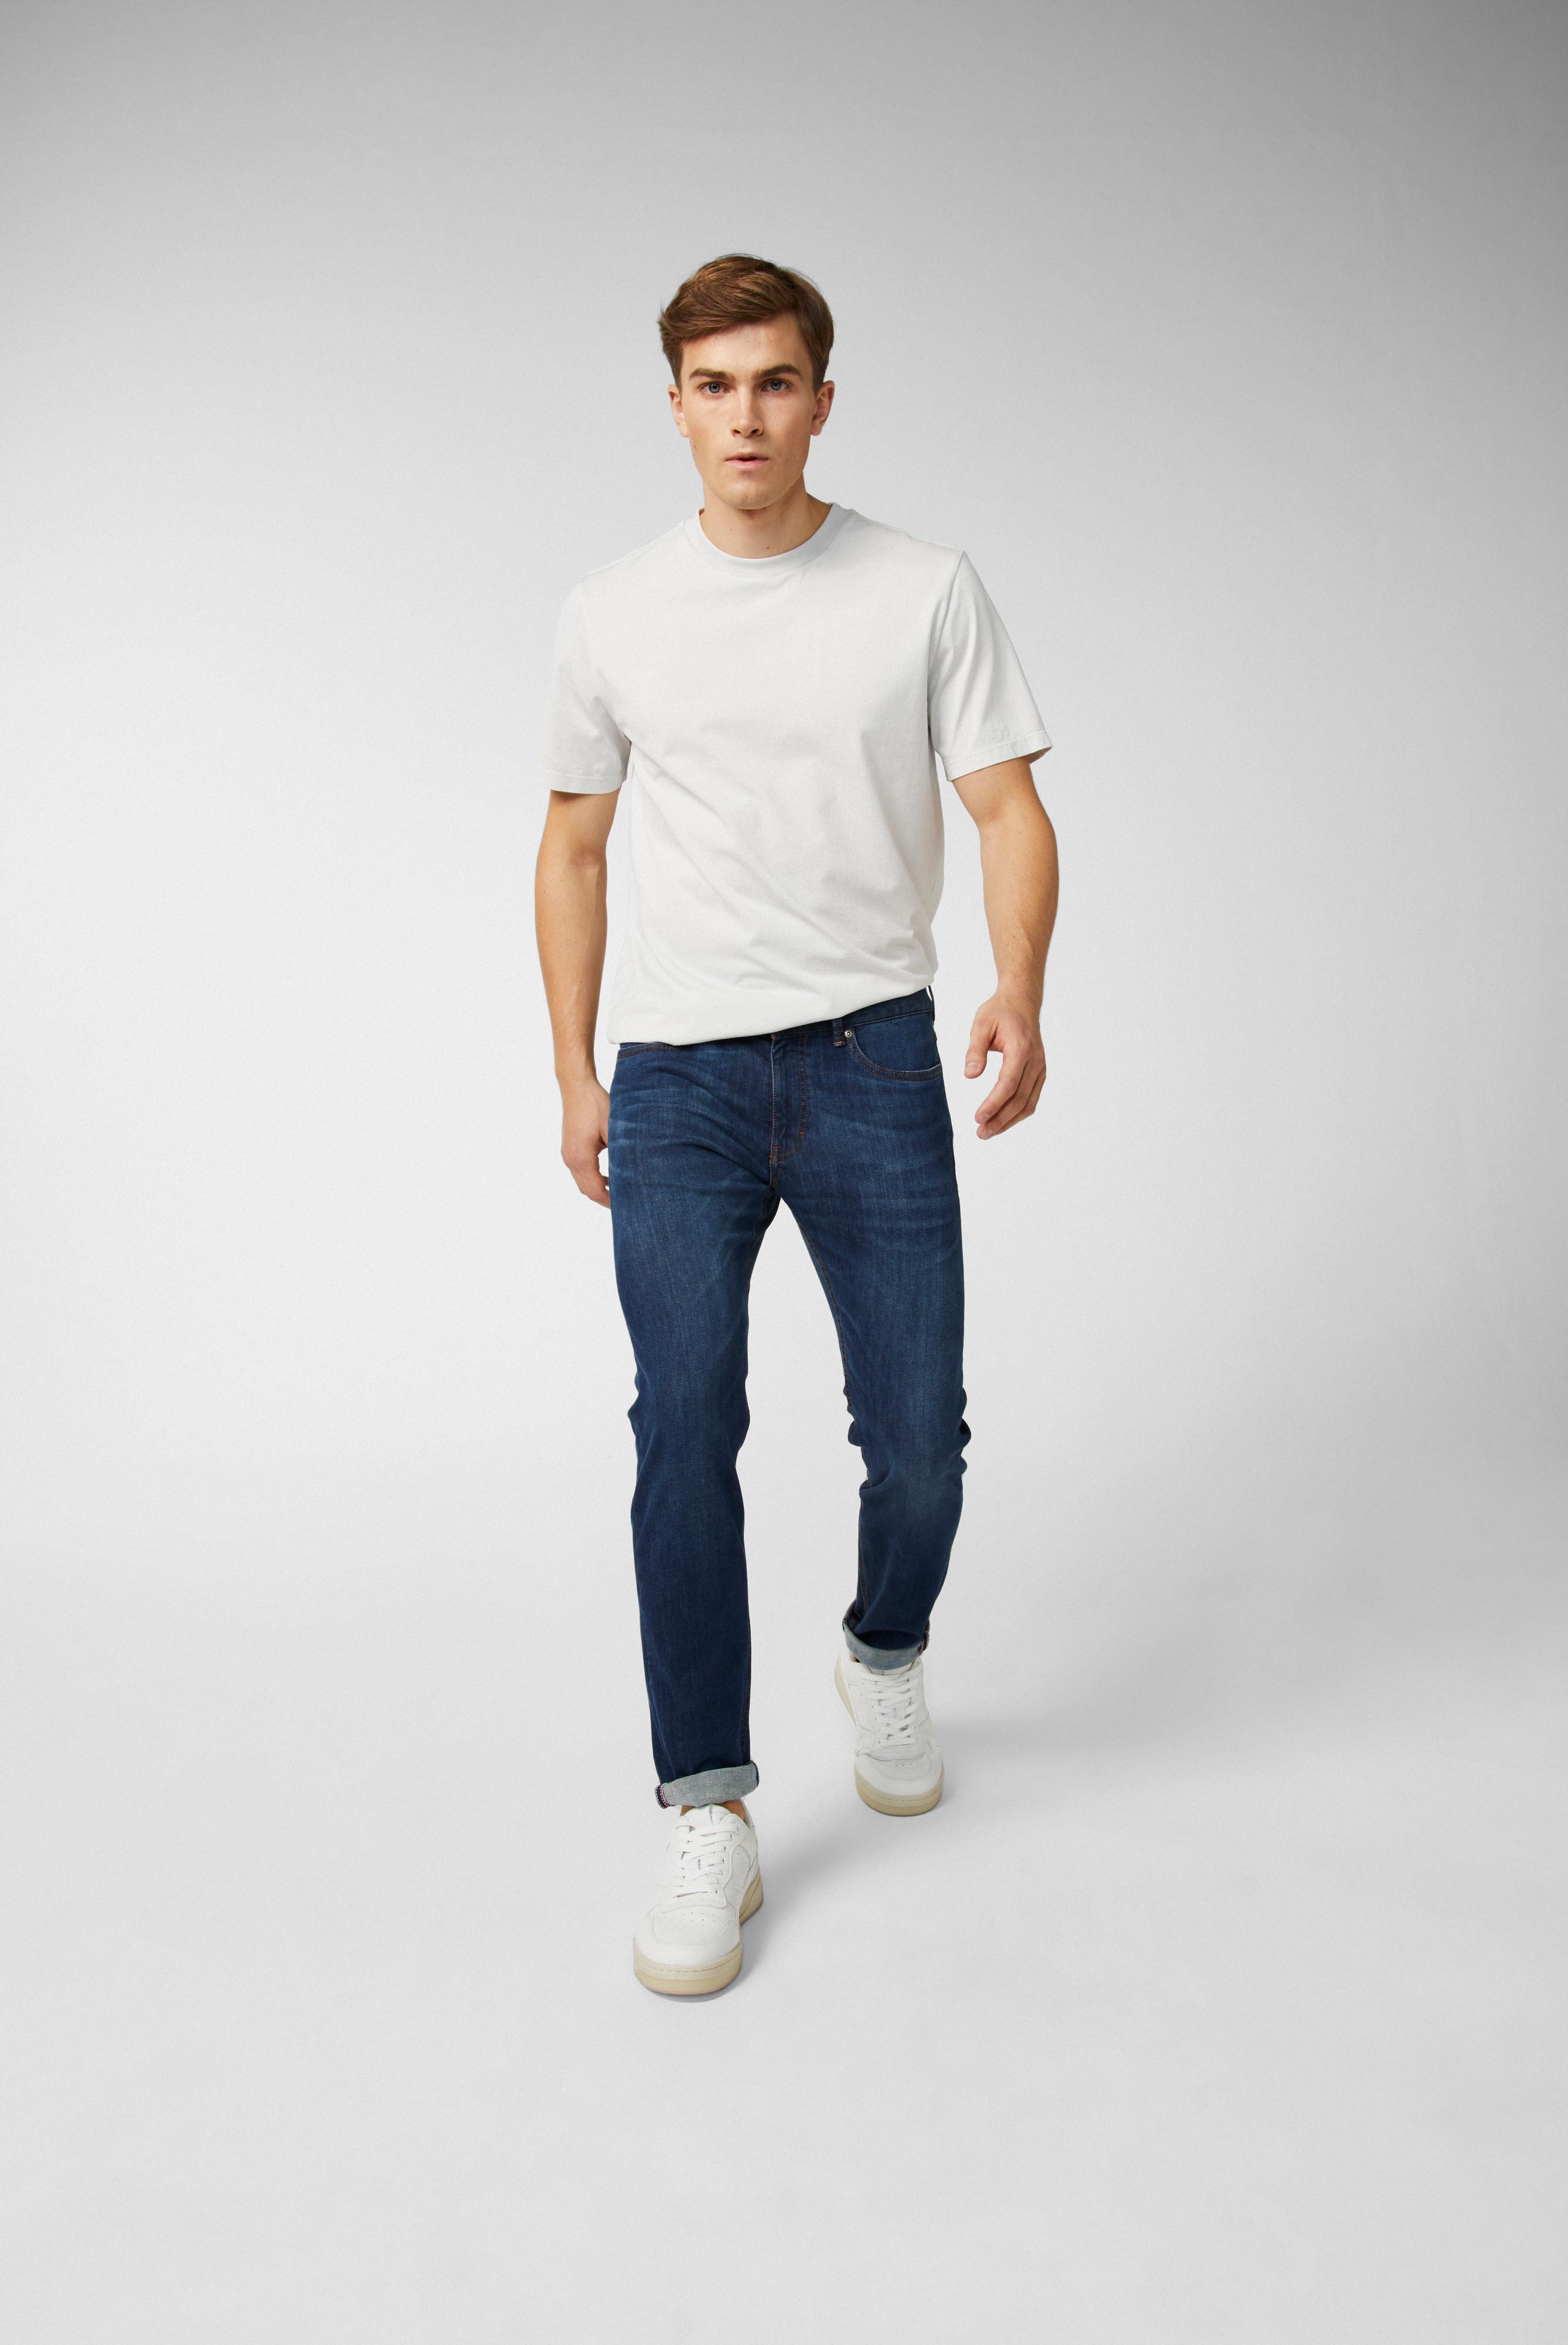 Jeans & Trousers+Slim Fit Jeans with stretch+80.7857..J00117.780.30N